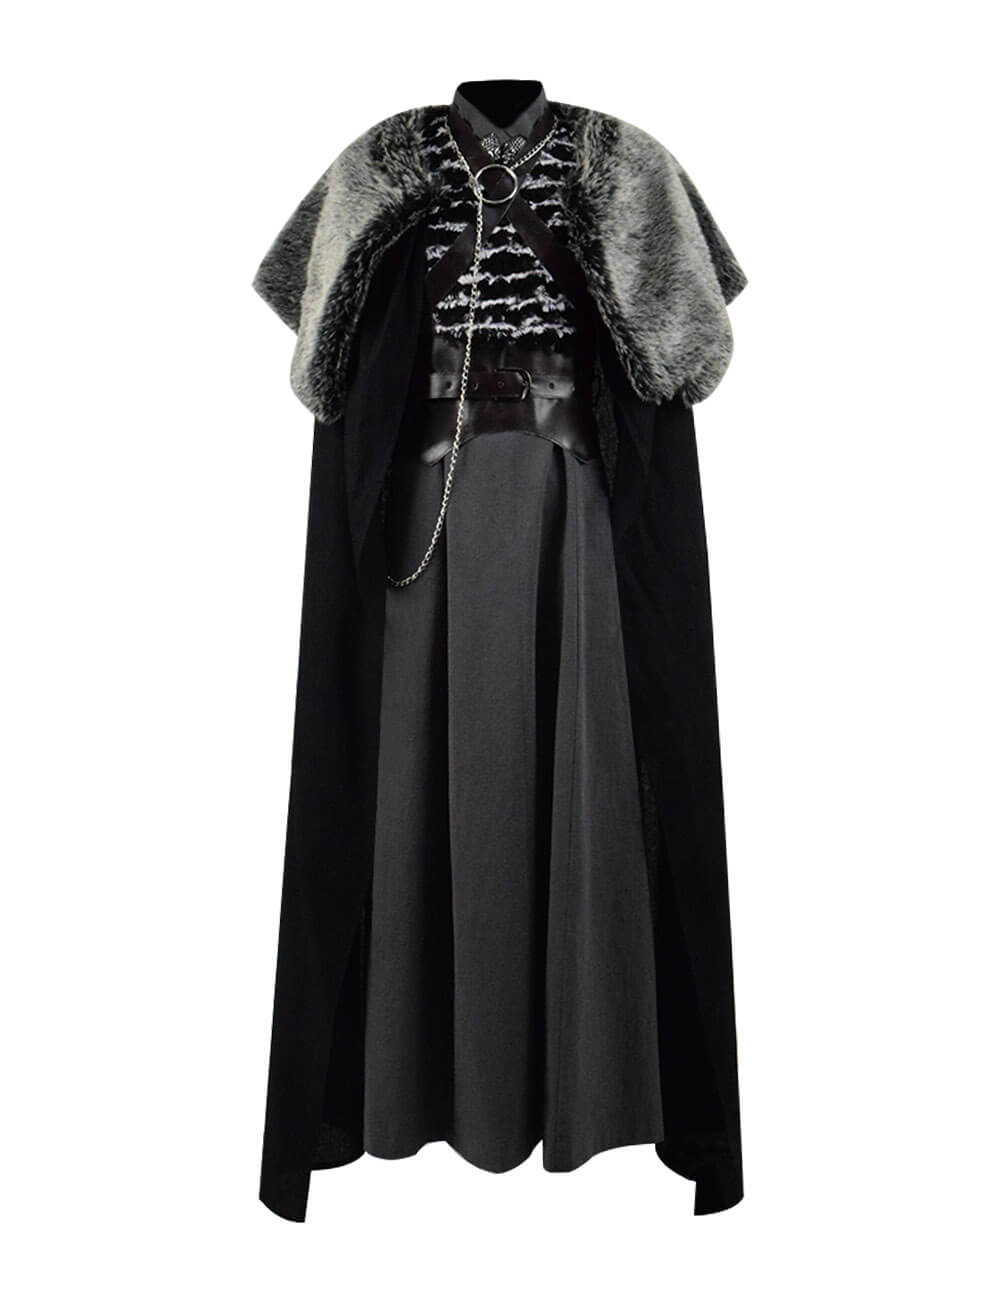 Game of Thrones Sansa Stark Dress Cape Clock Cospaly Costume Ideas For ...